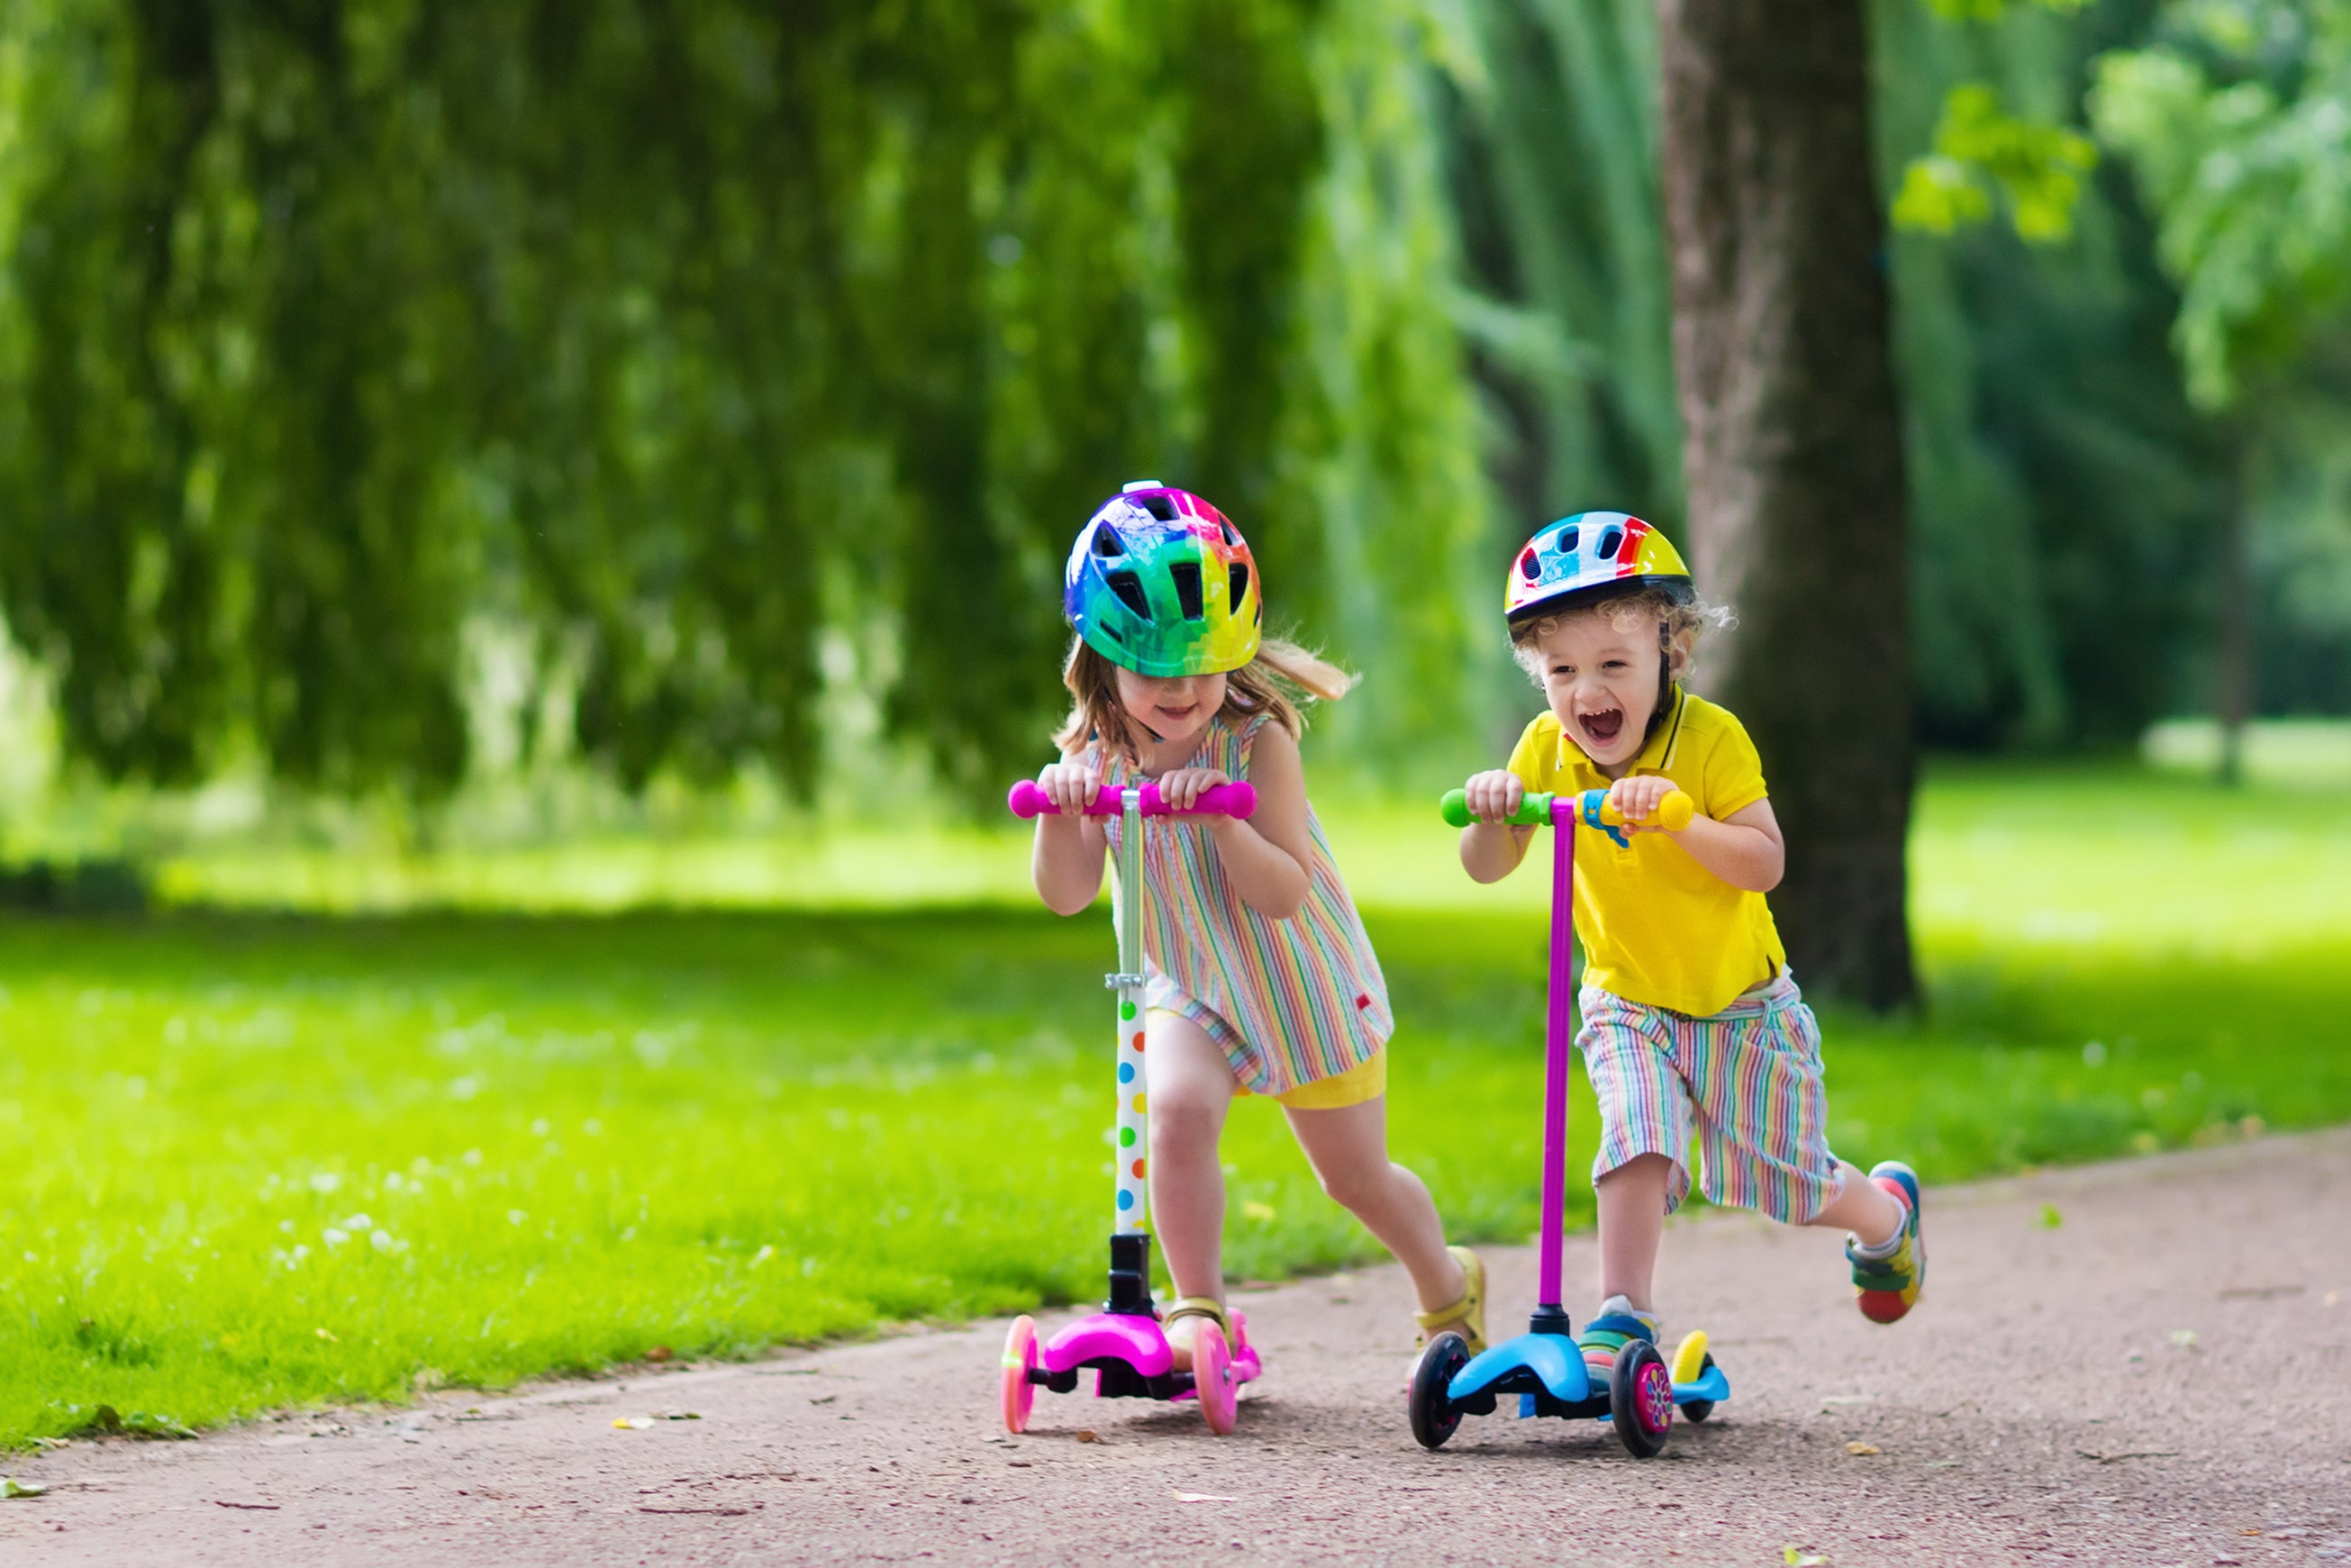 Children wearing helmets ride scooters through a park